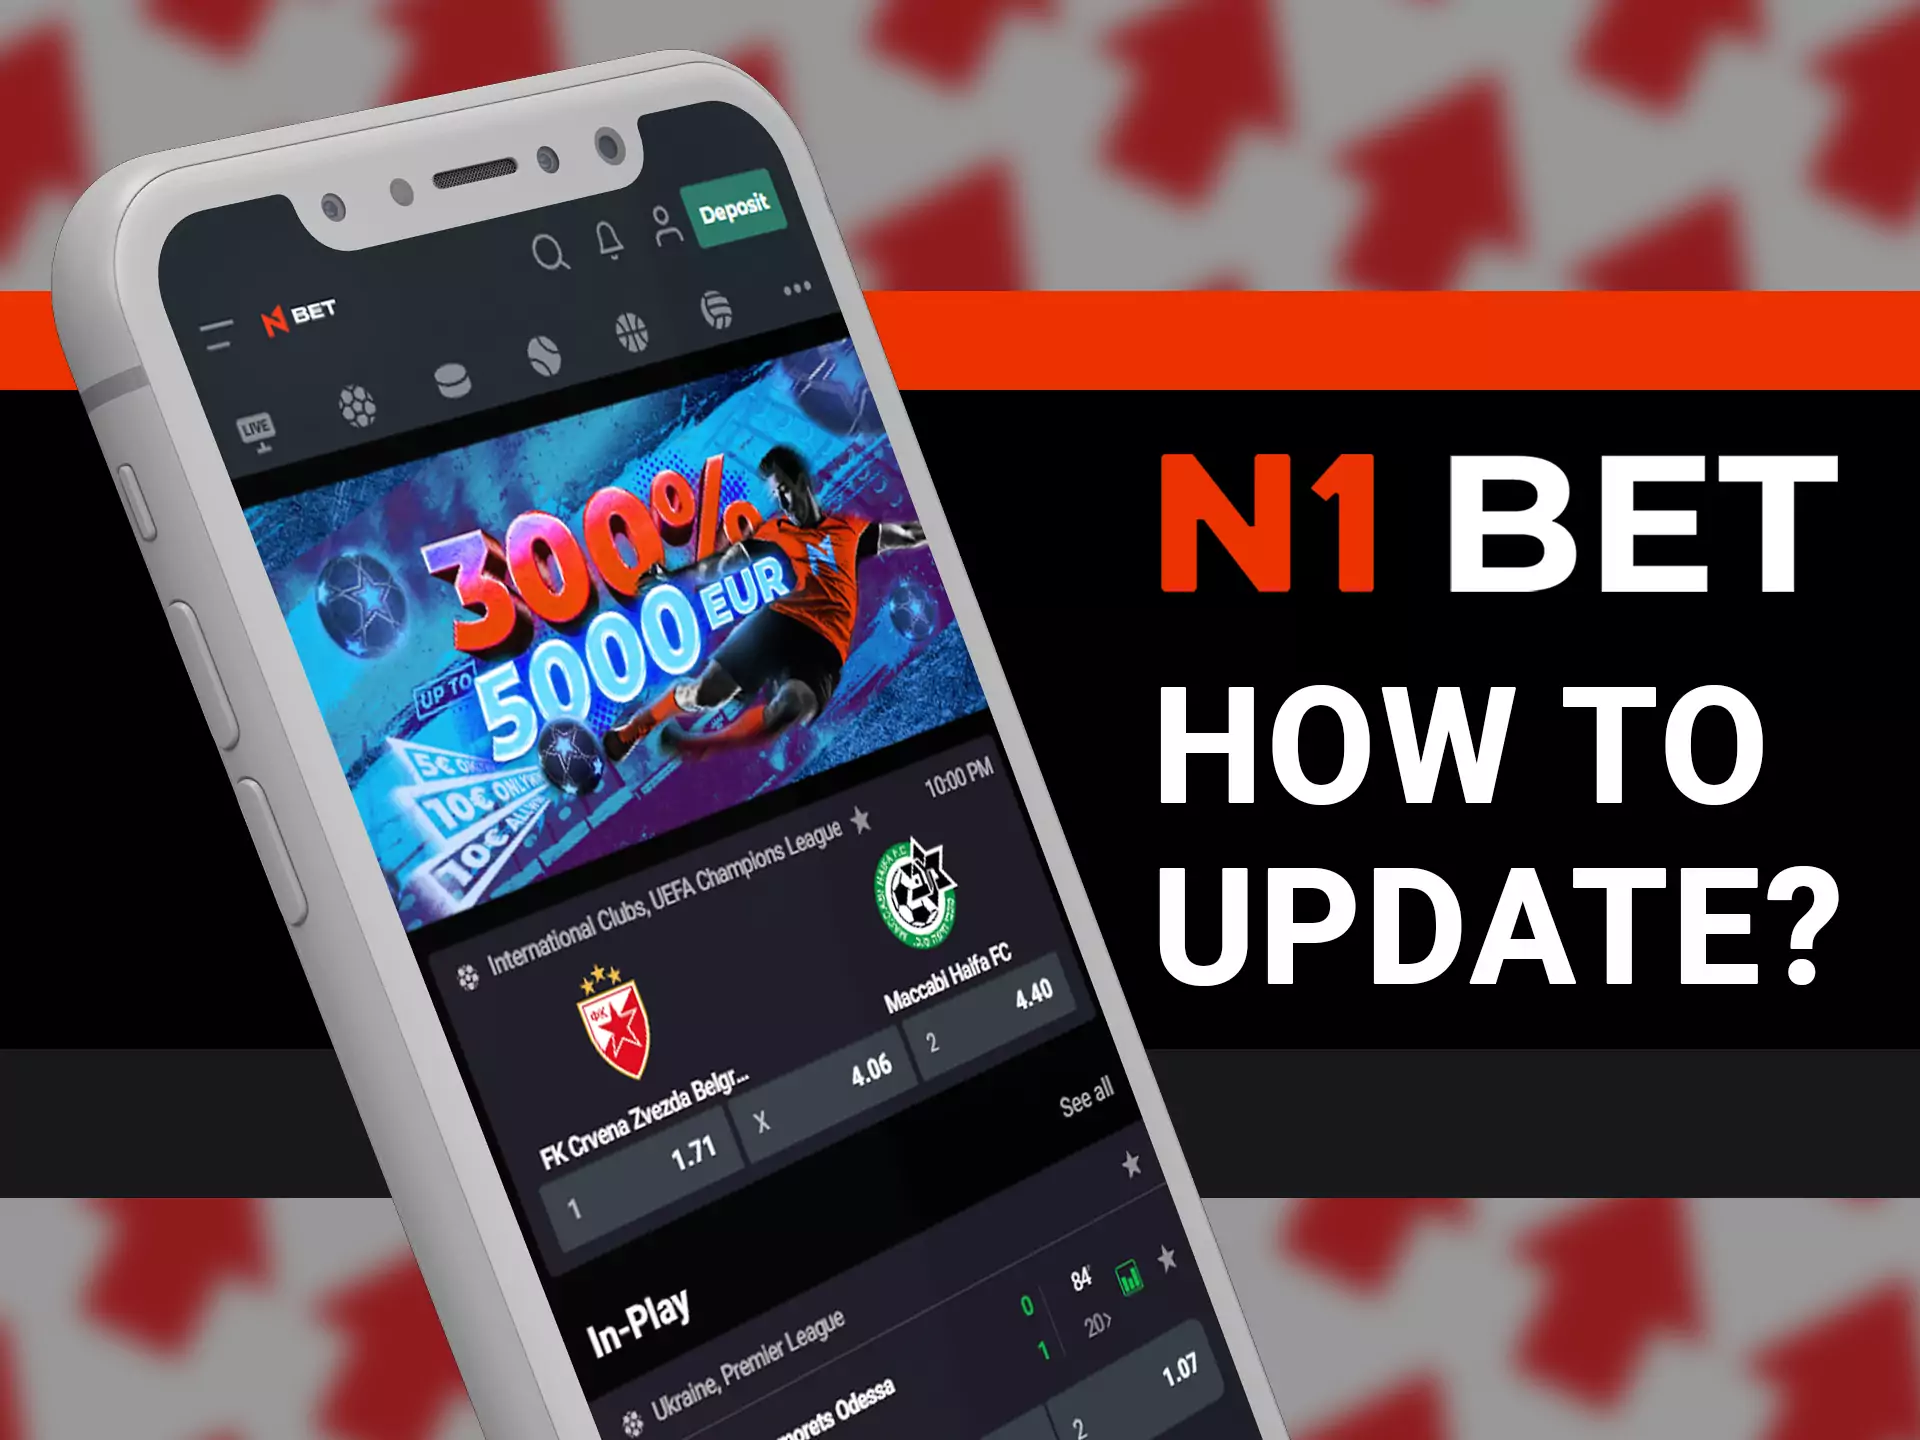 N1Bet app updates automatically.